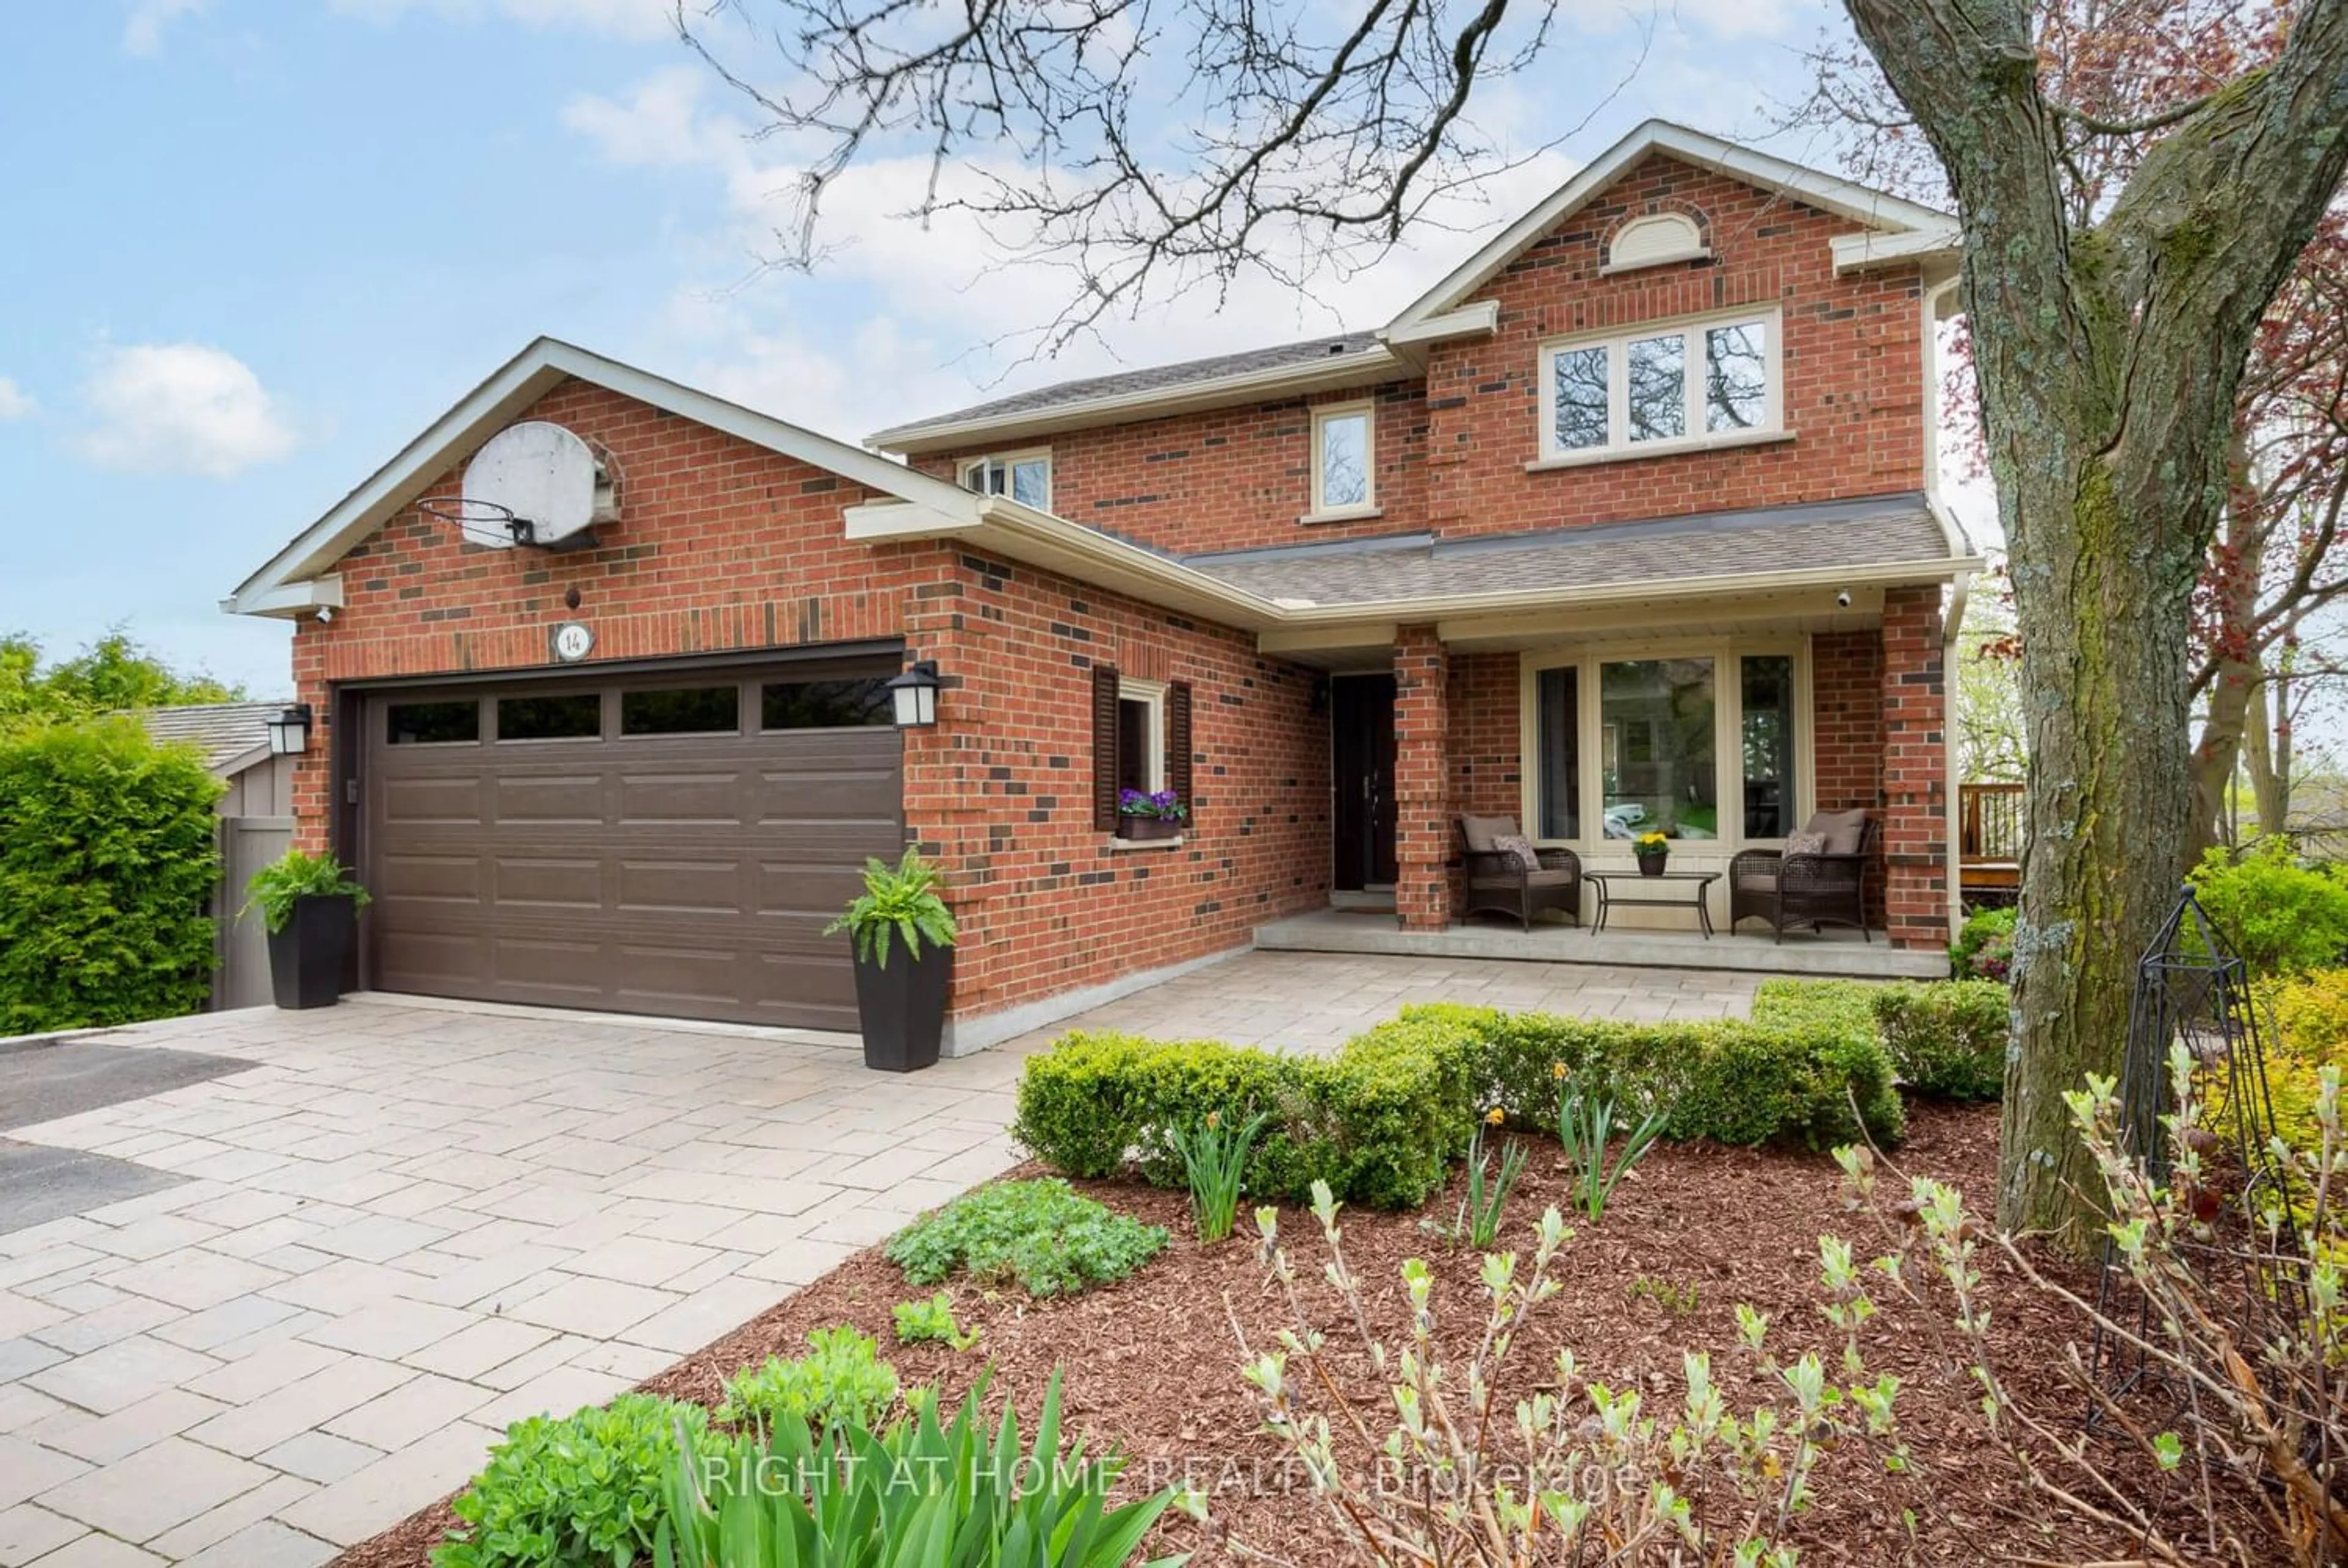 Home with brick exterior material for 14 Moffat Cres, Aurora Ontario L4G 4Z6